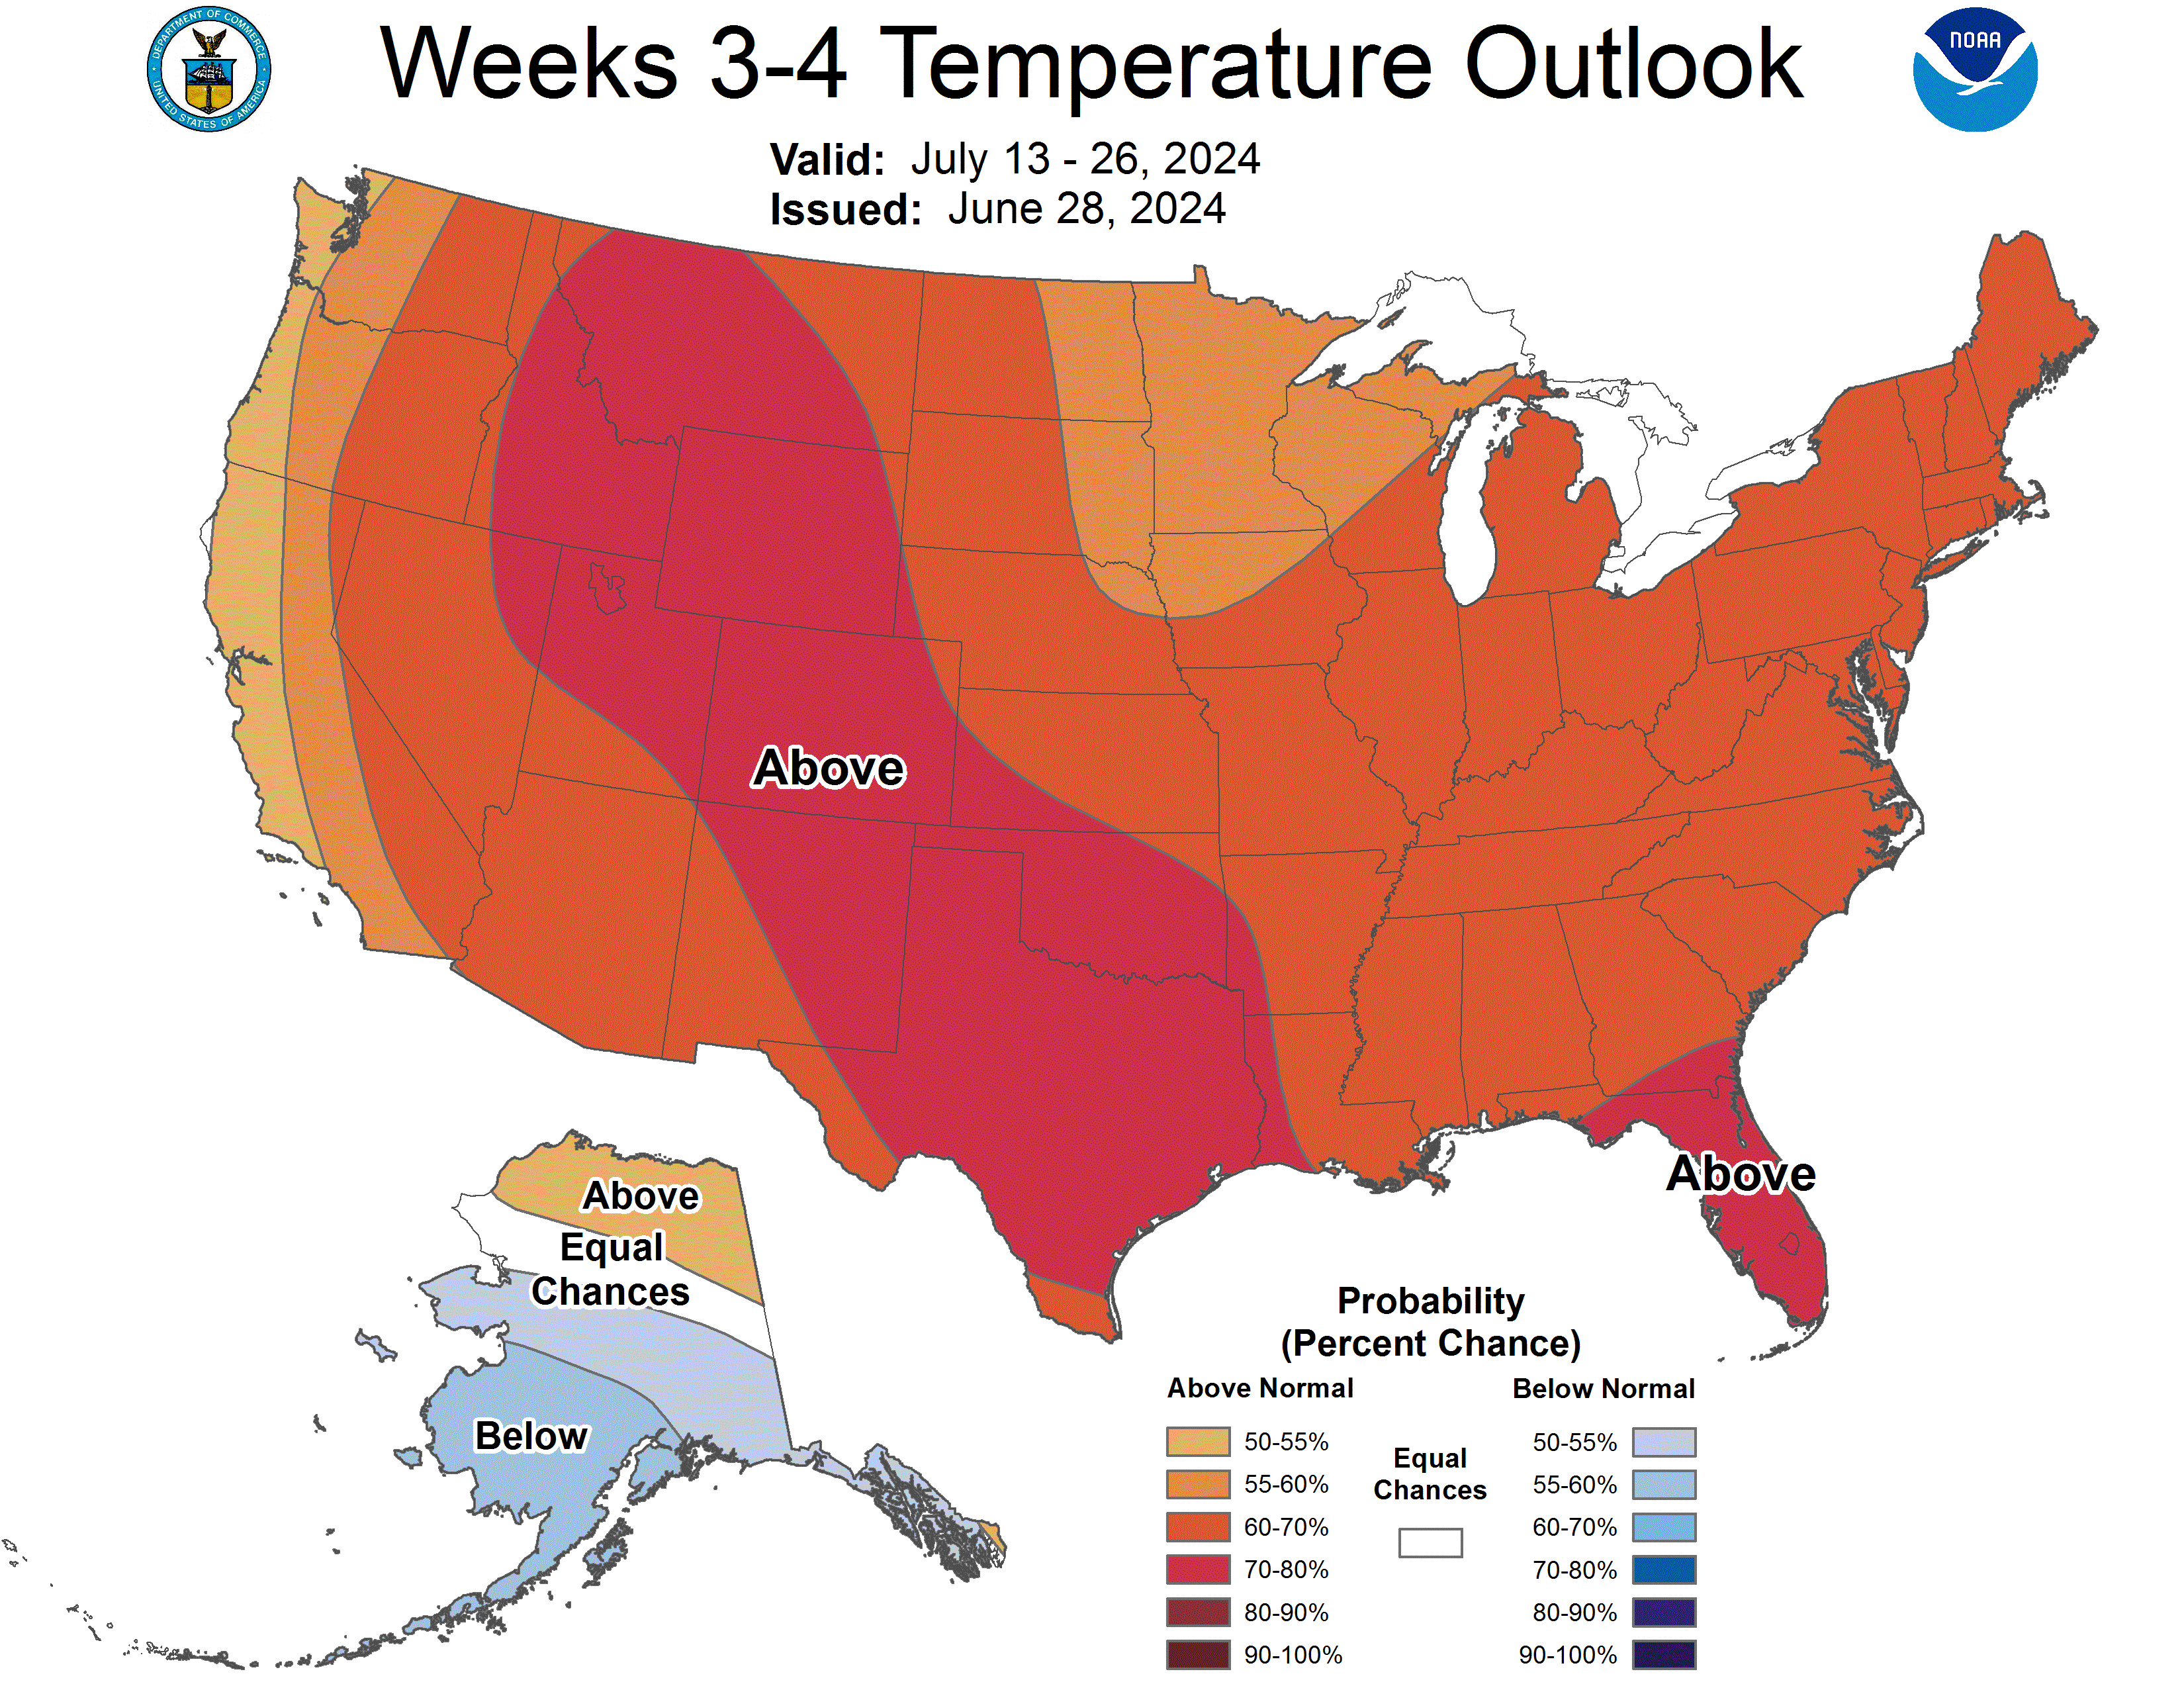 Week 3-4 Outlooks - Temperature Probability